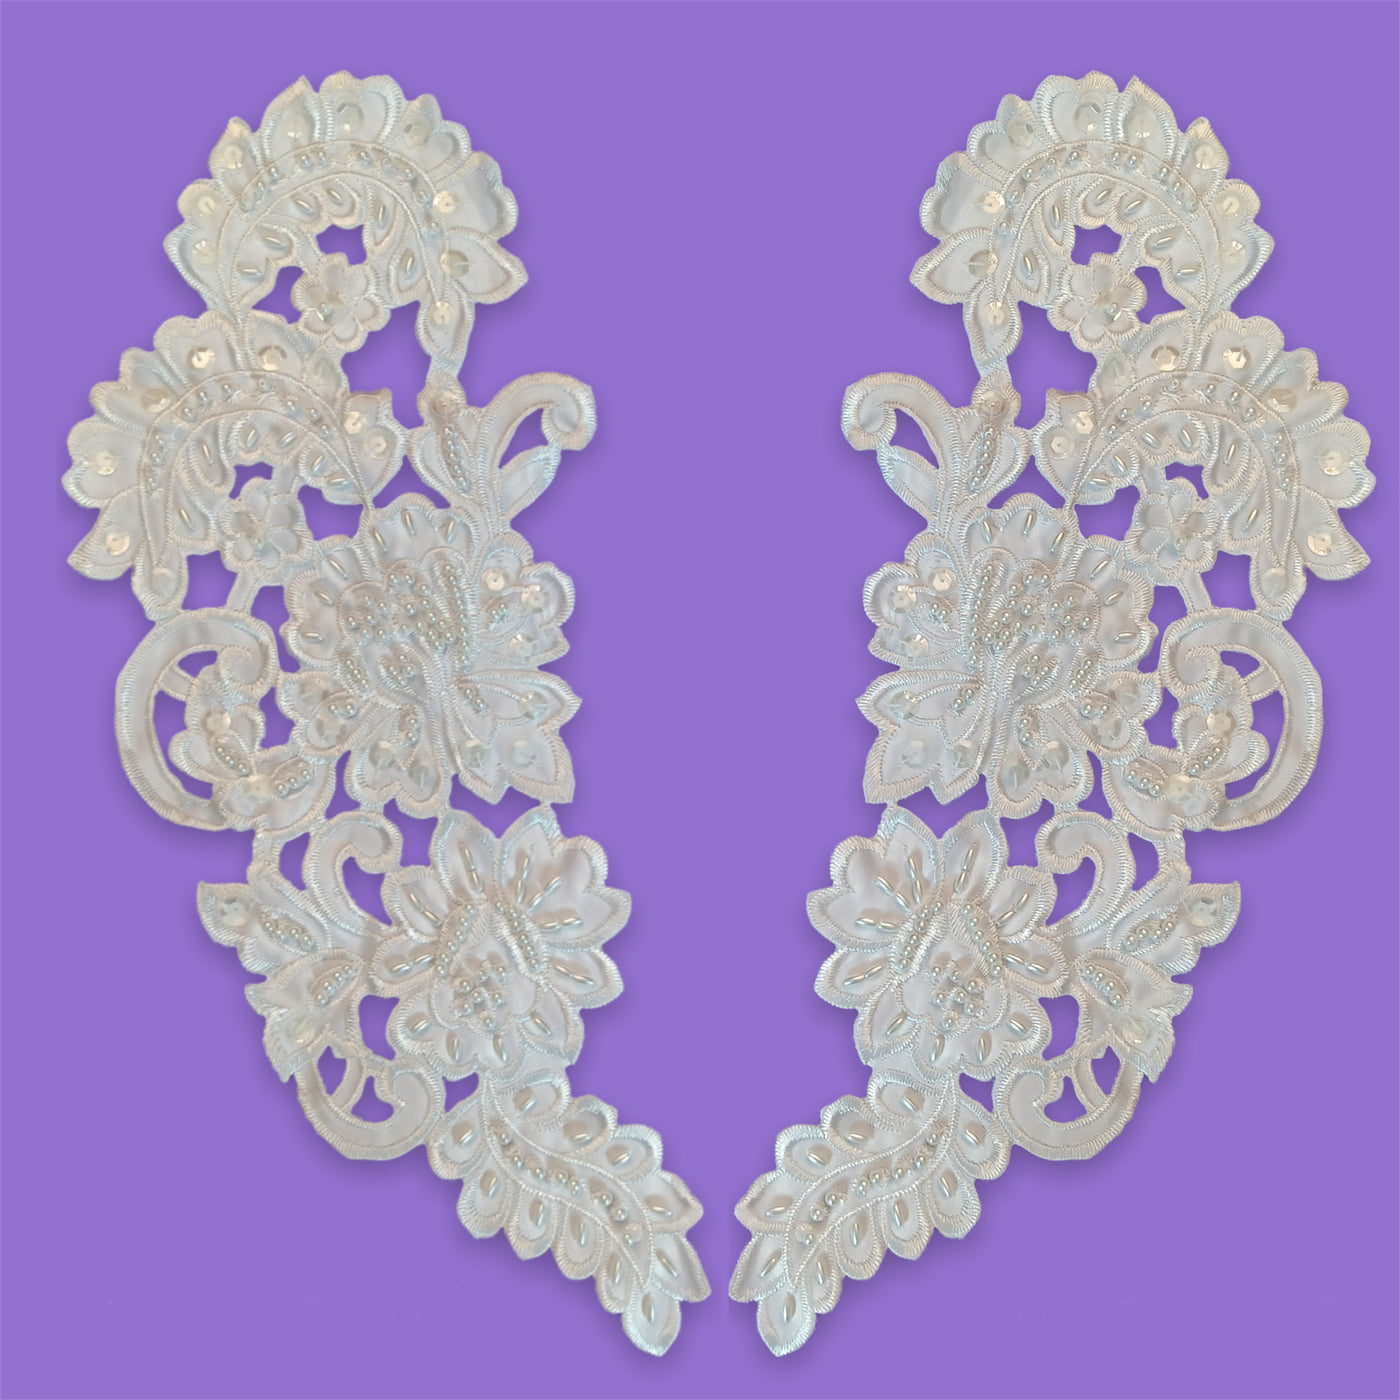 Beaded Lace Applique Embroidered on 100% Polyester Satin | Lace USA